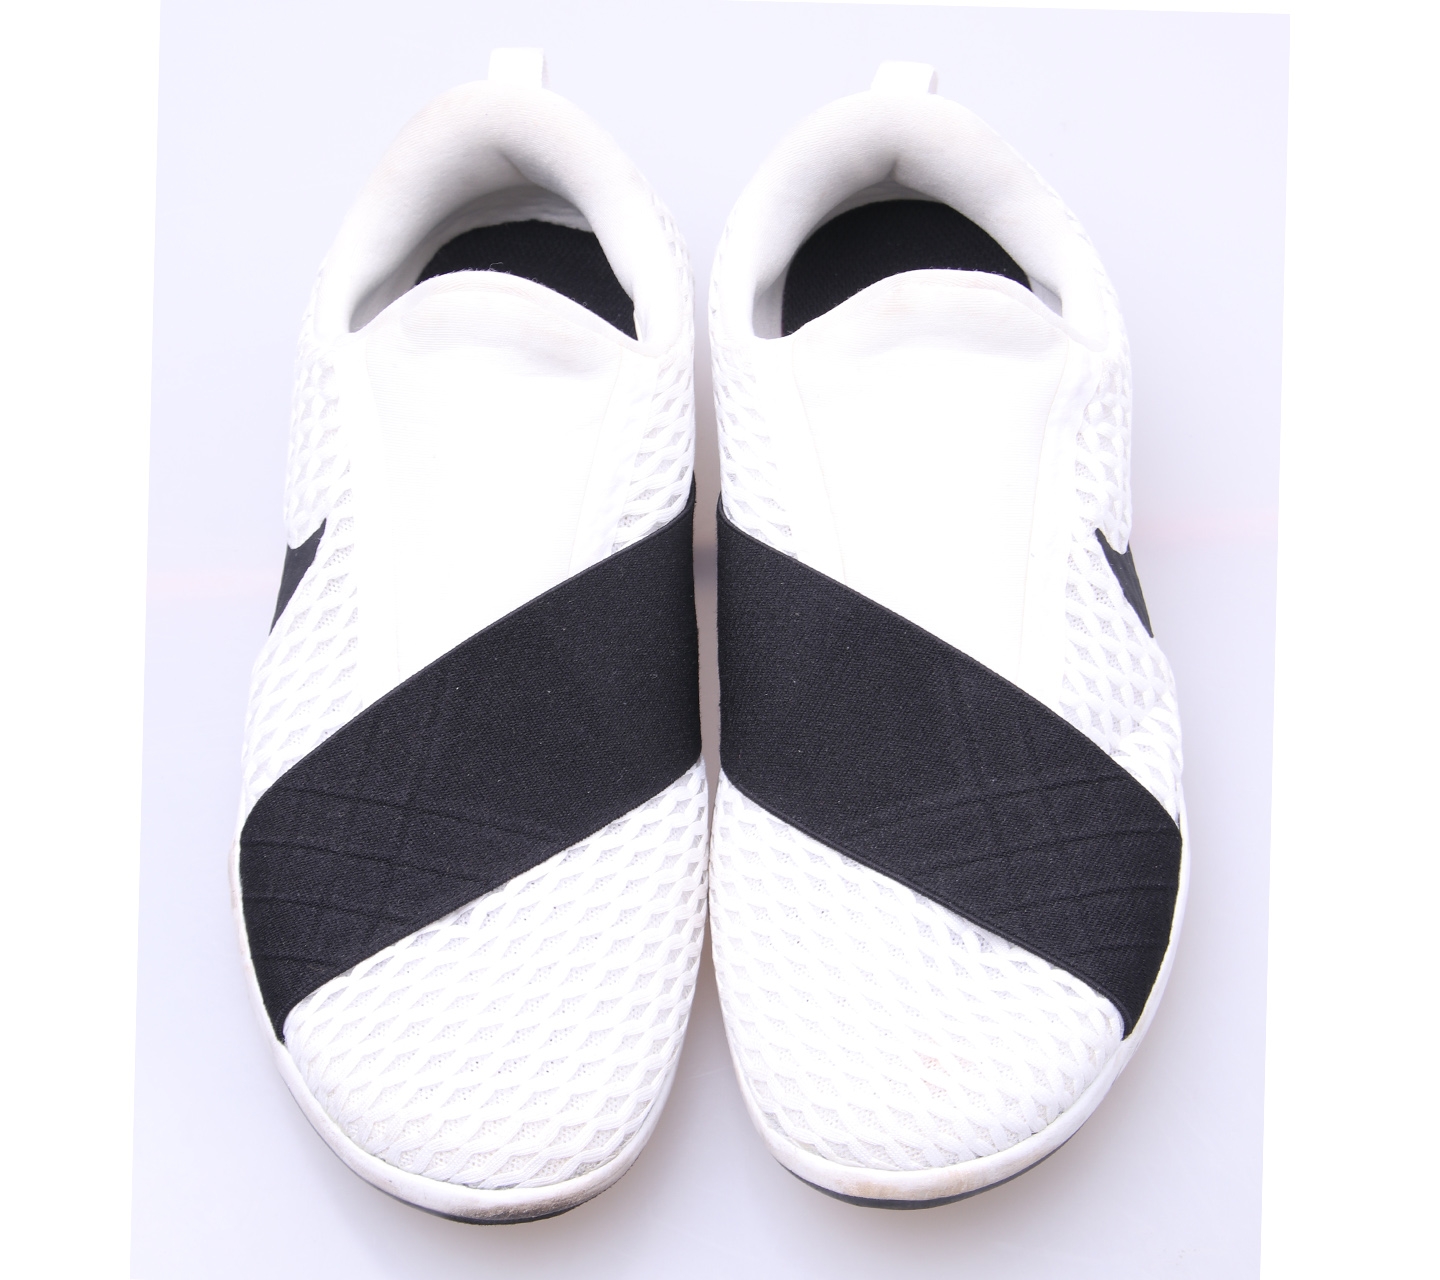 Nike White Free Connect Womens Sneakers